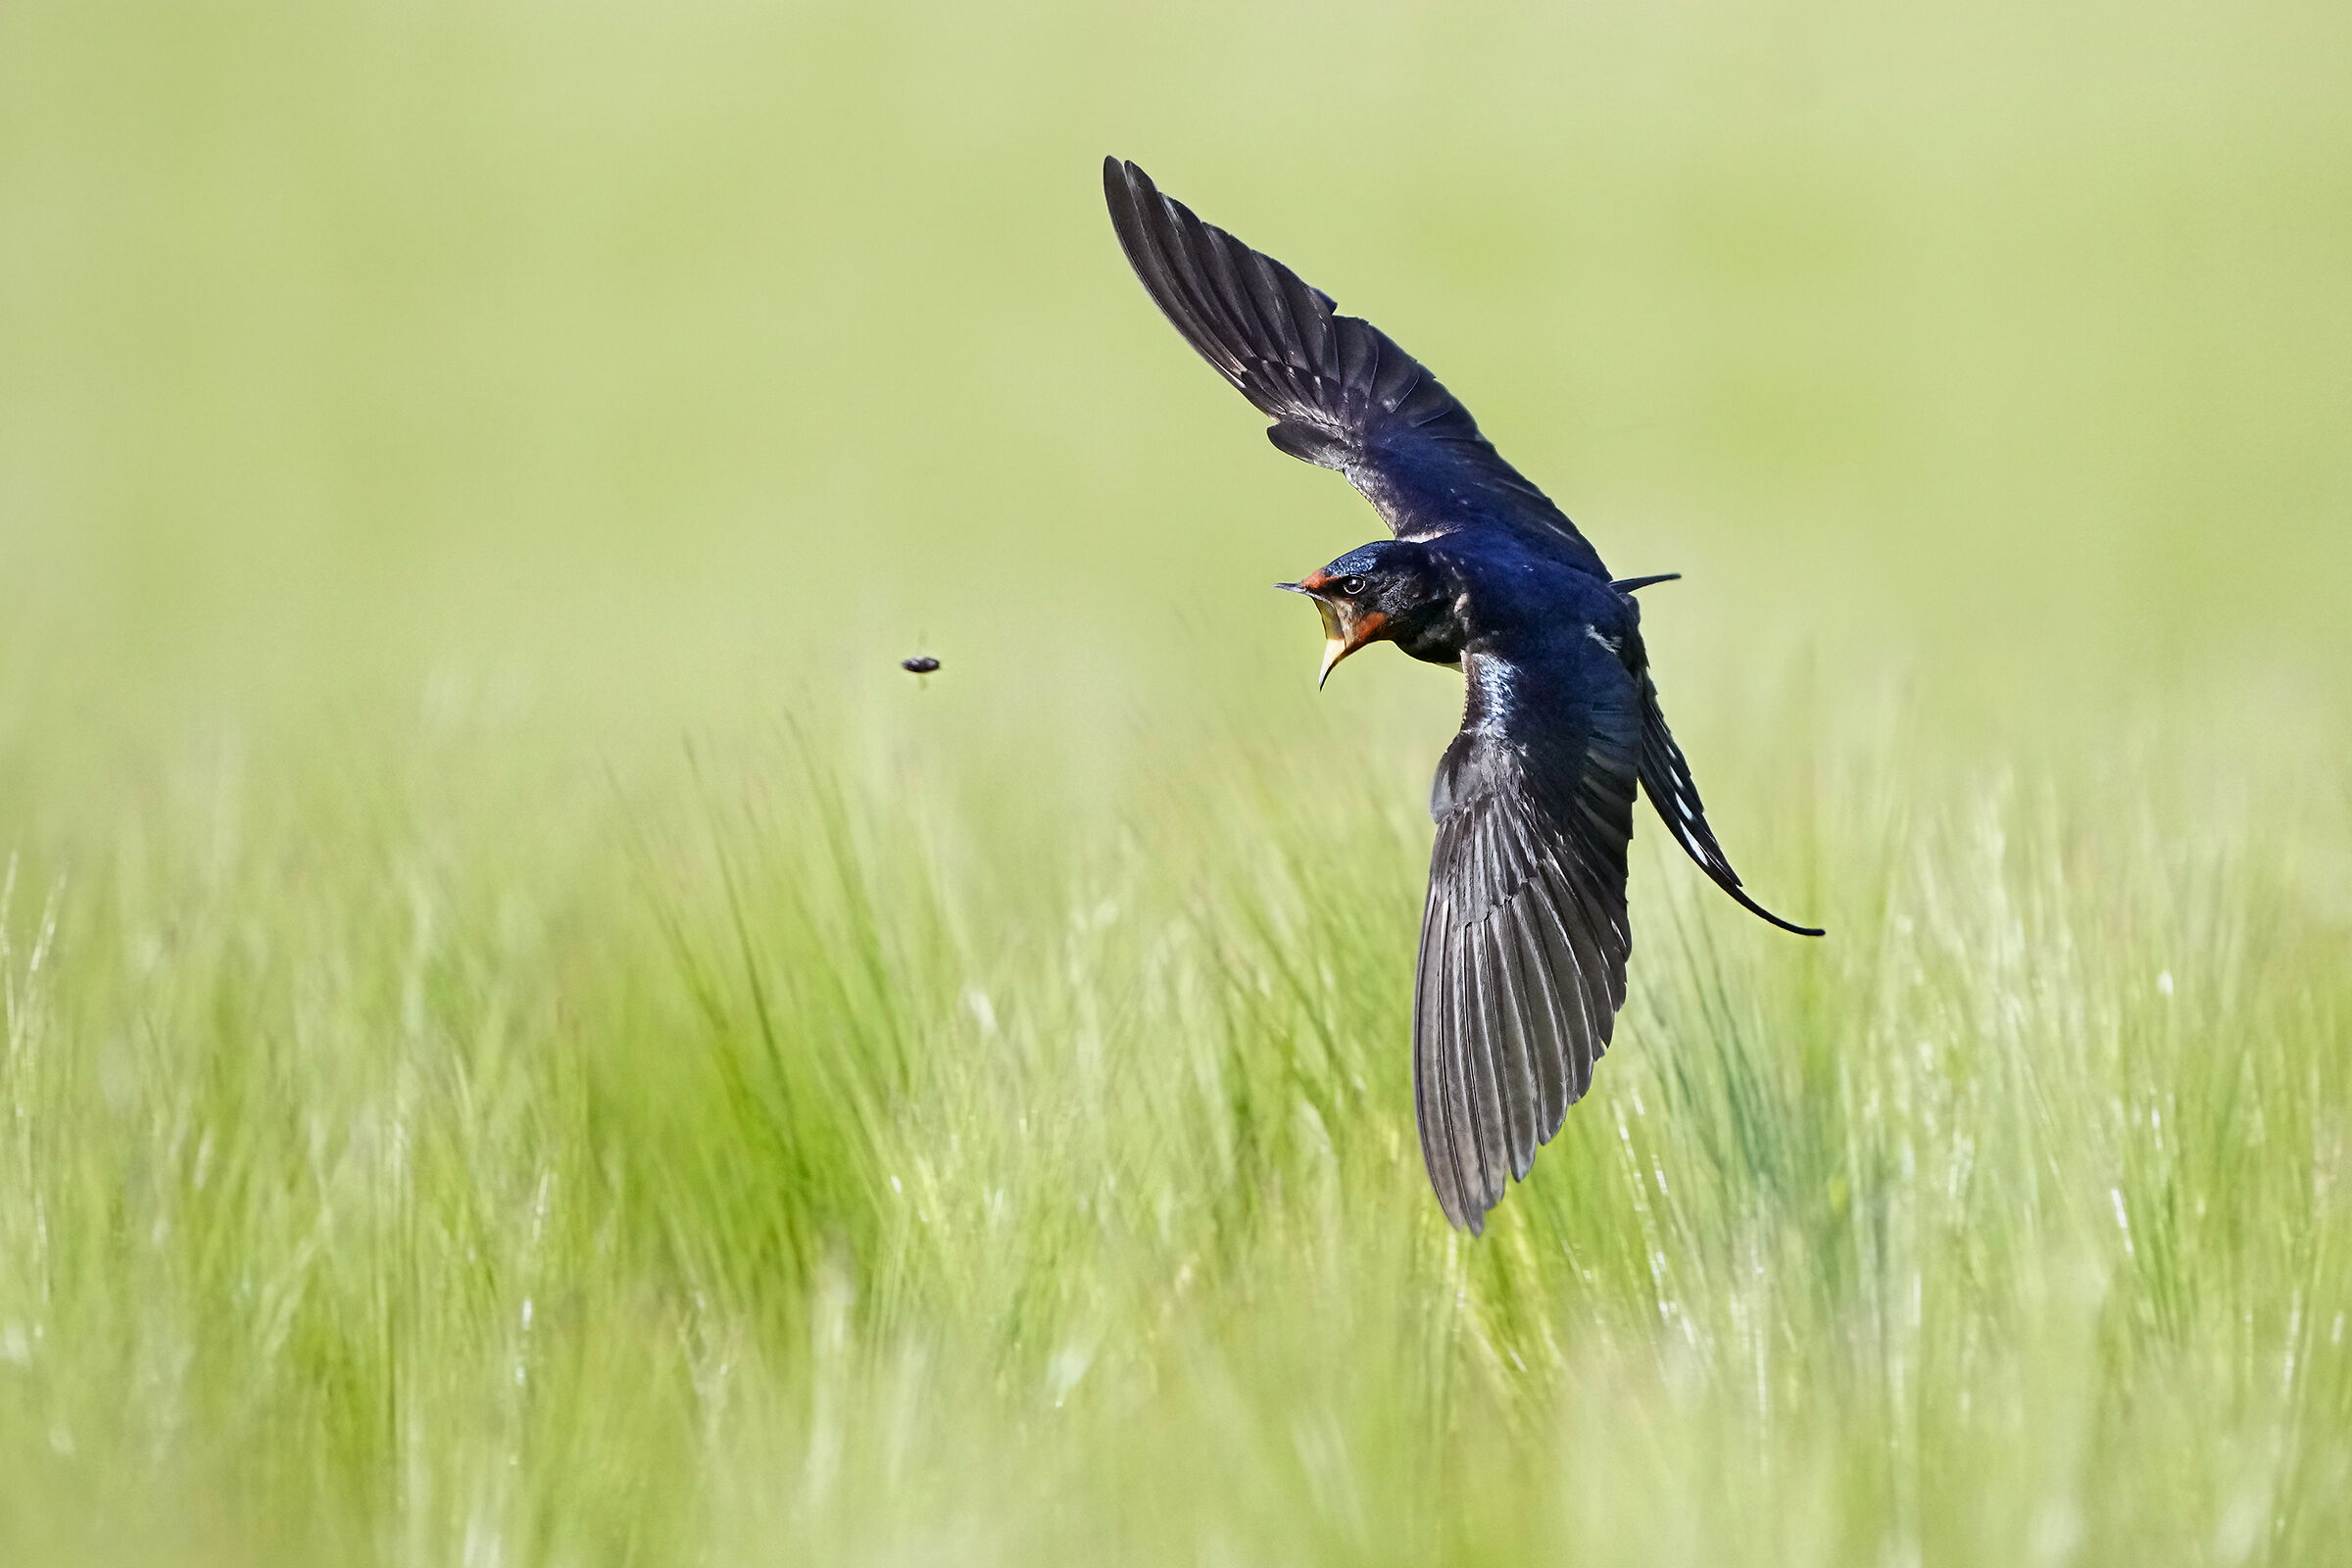 Catching - Domestic swallow...